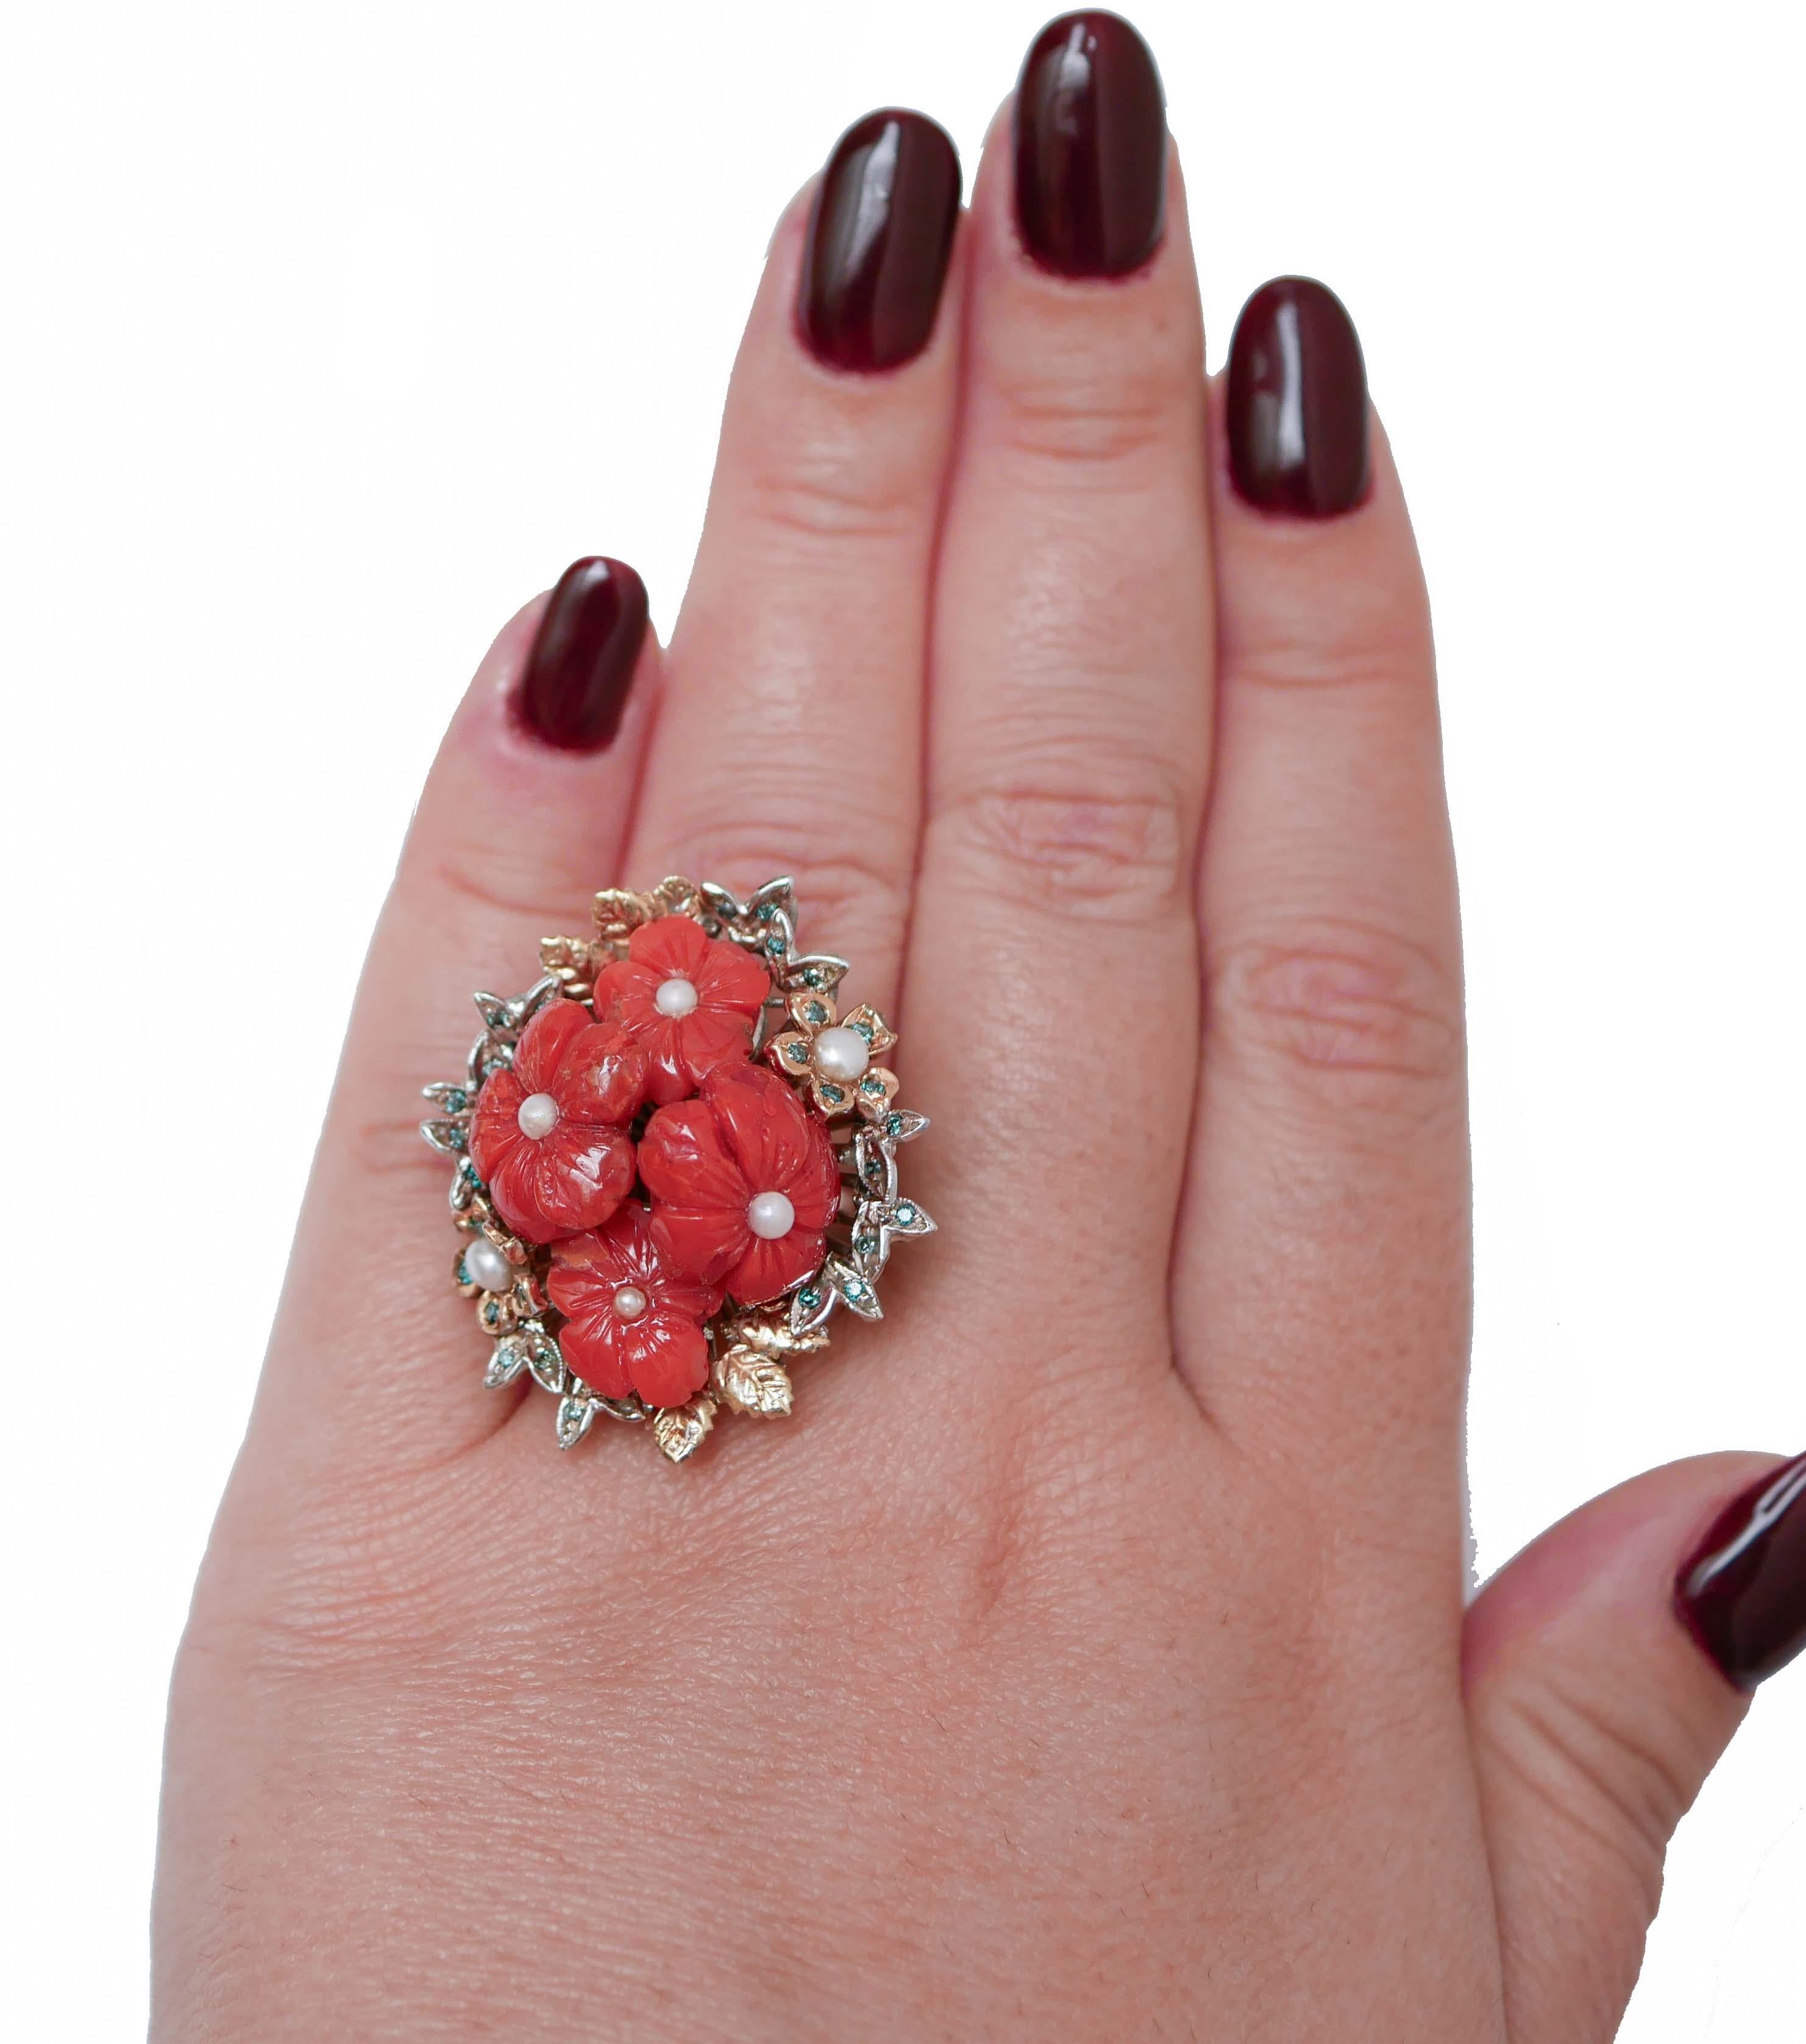 Mixed Cut Coral, Fancy Diamonds, Pearls, 14 Karat White Gold and Rose Gold Ring.  For Sale